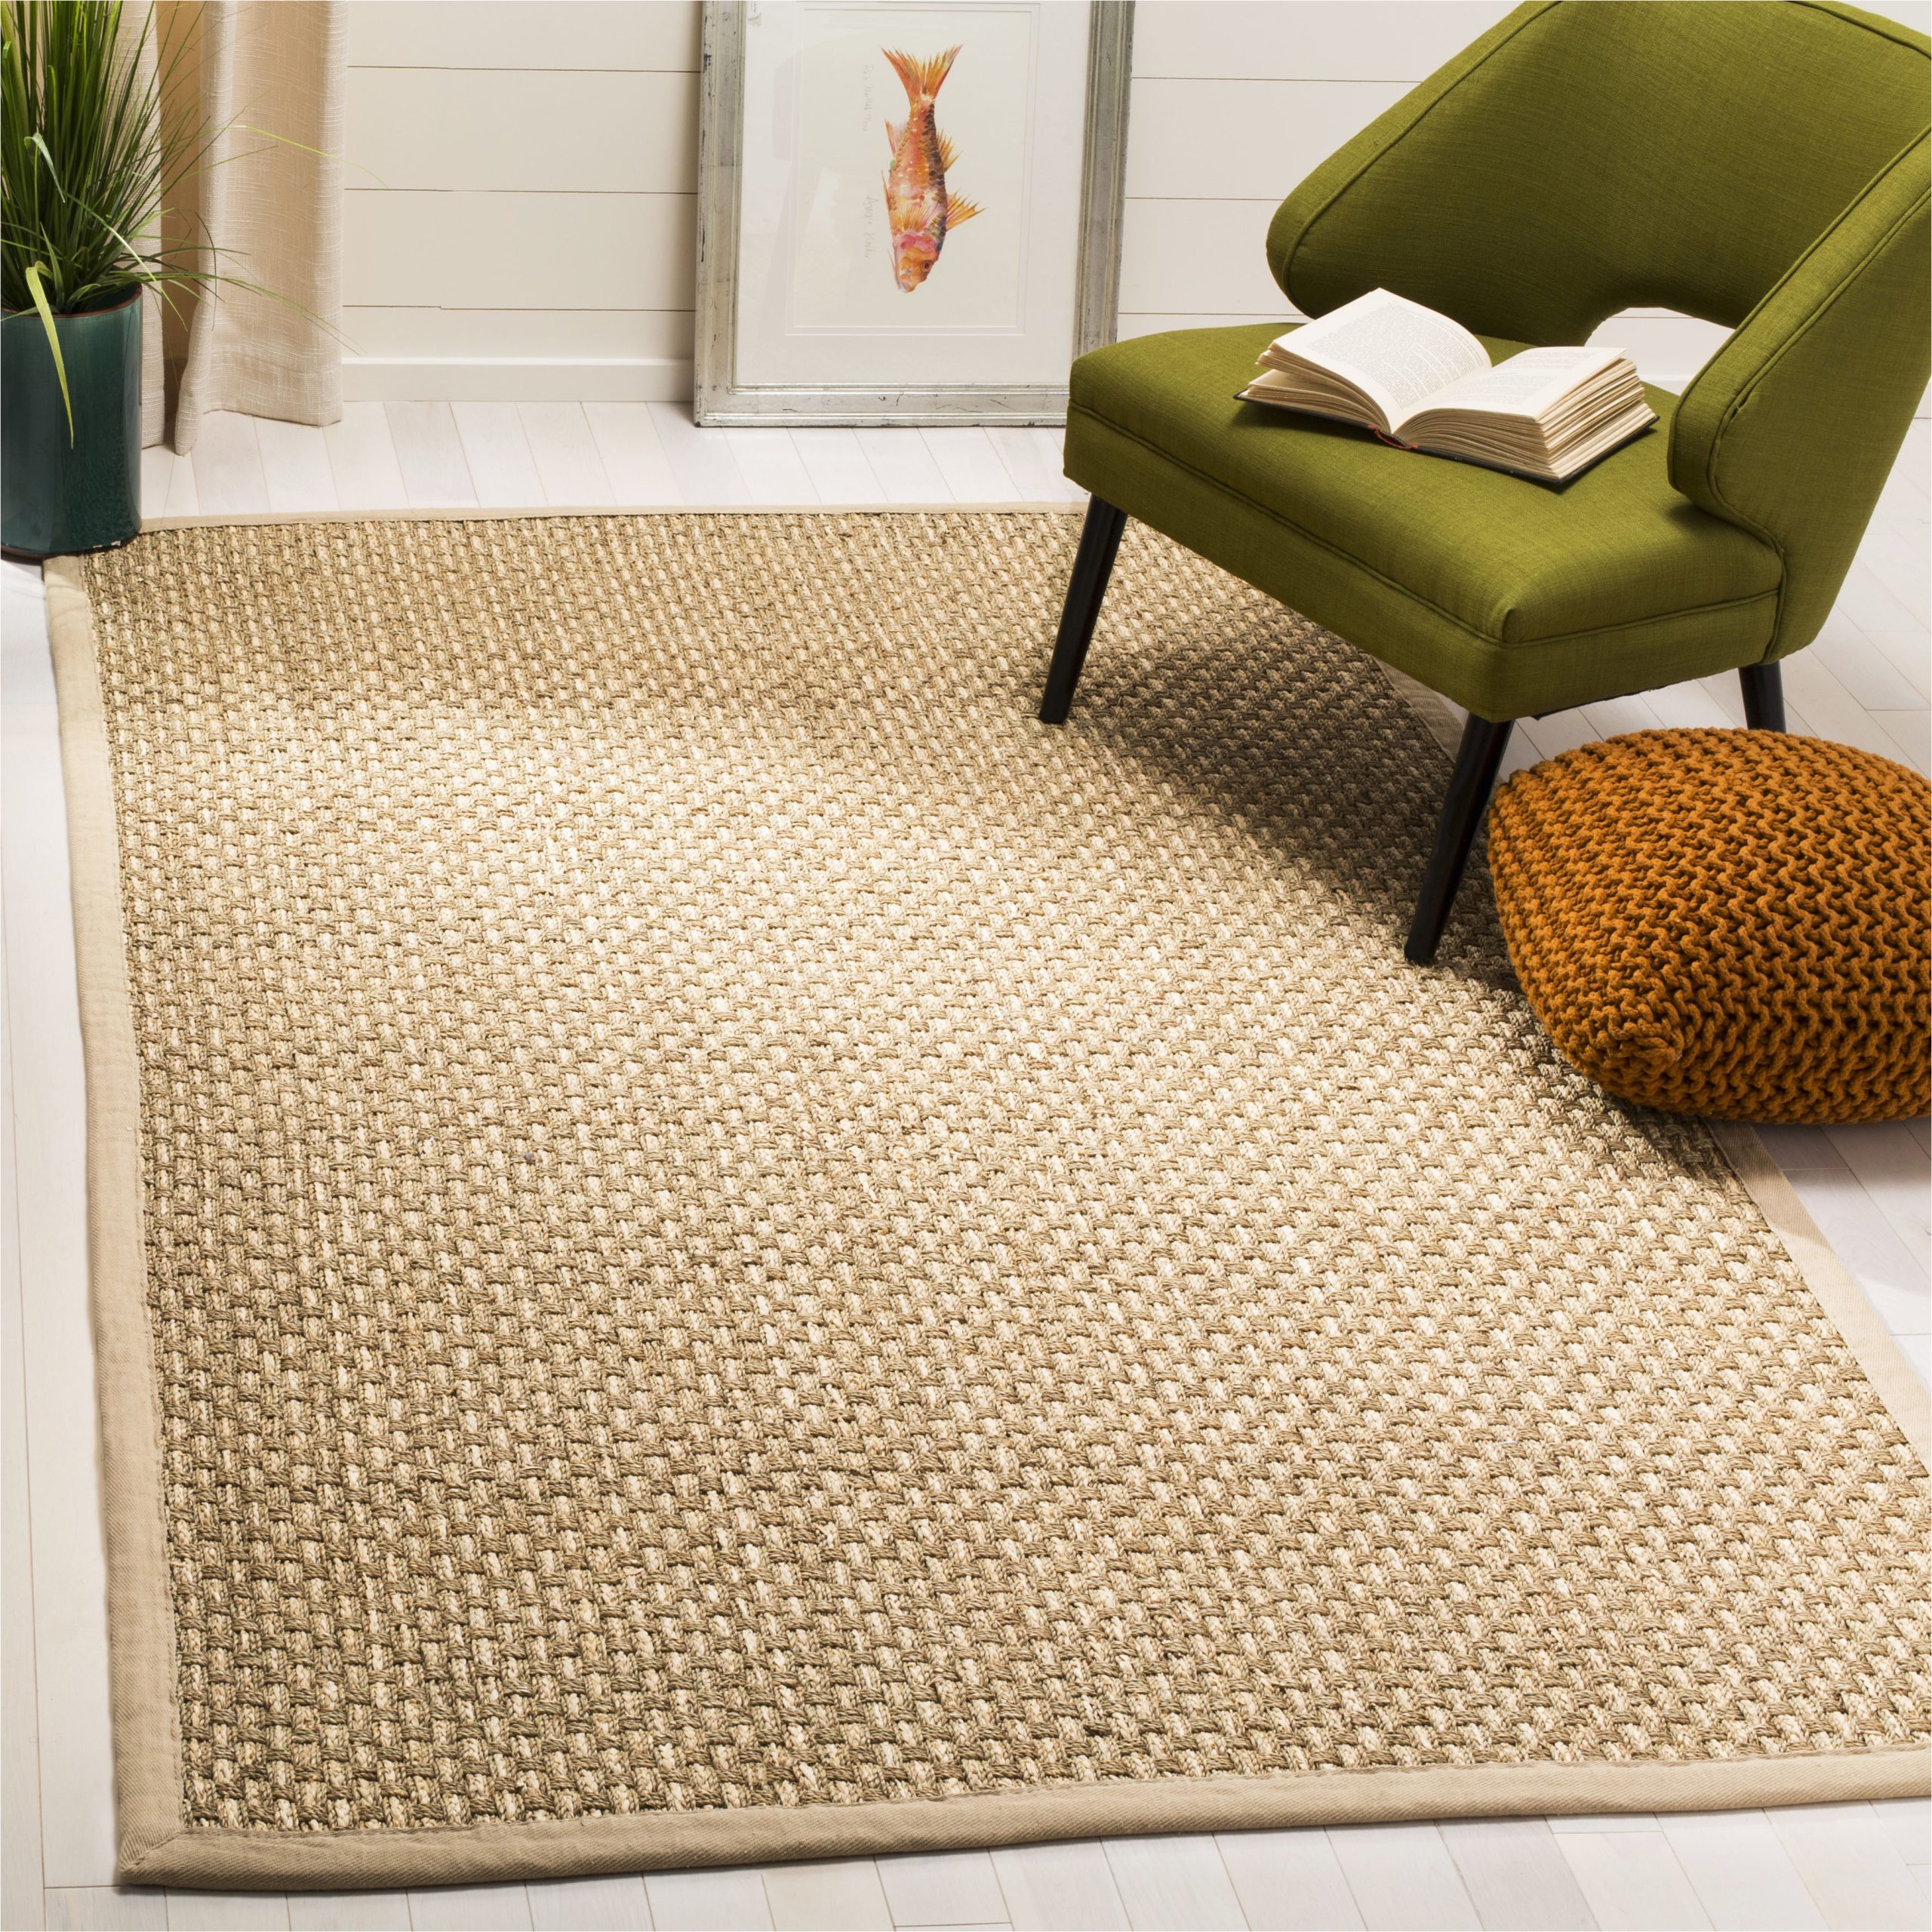 Abrielle Power Loom Natural Ivory area Rug Safavieh Power Loomed Natural Fiber Collection Natural/beige area Rugs – Nf118a